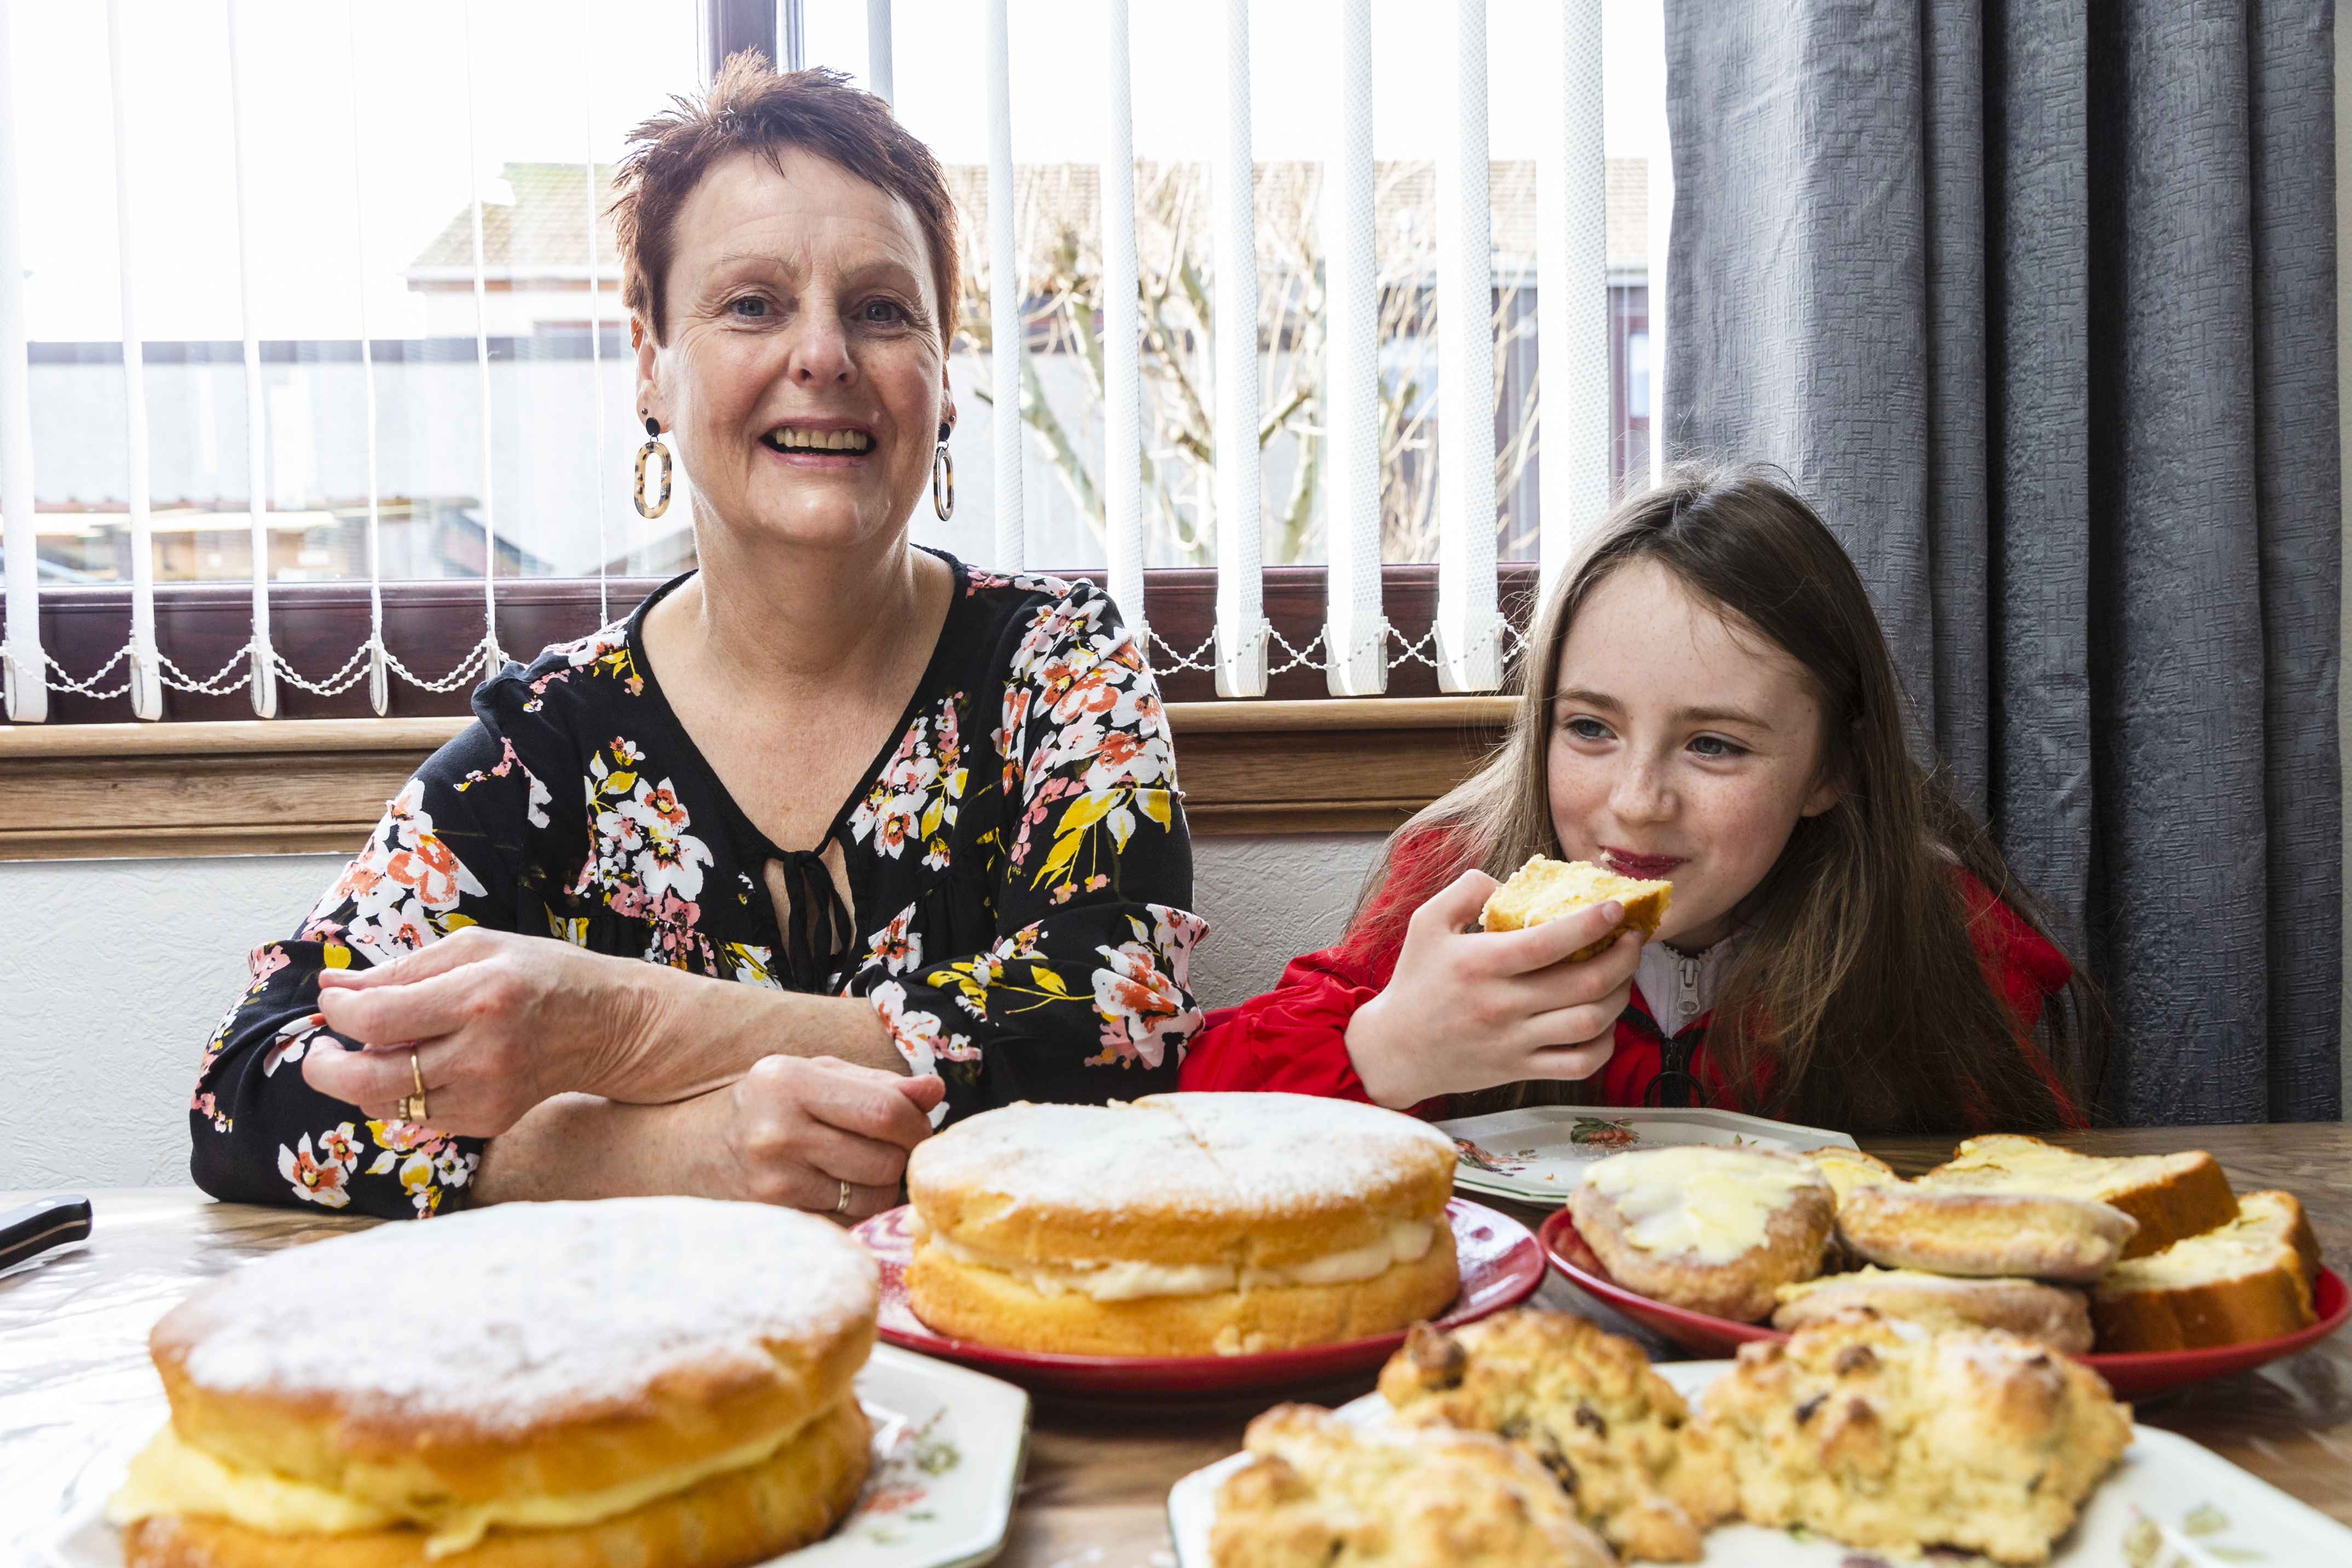 Anne Mclean, who makes scones and cakes for the ice cream shop she works in got a new oven which was faulty. When the repairman came to look at it her told her it was her cooking that had caused the problem. Anne pictured with her granddaughter Heidi McLean, 6, enjoying some of the cakes she bakes.